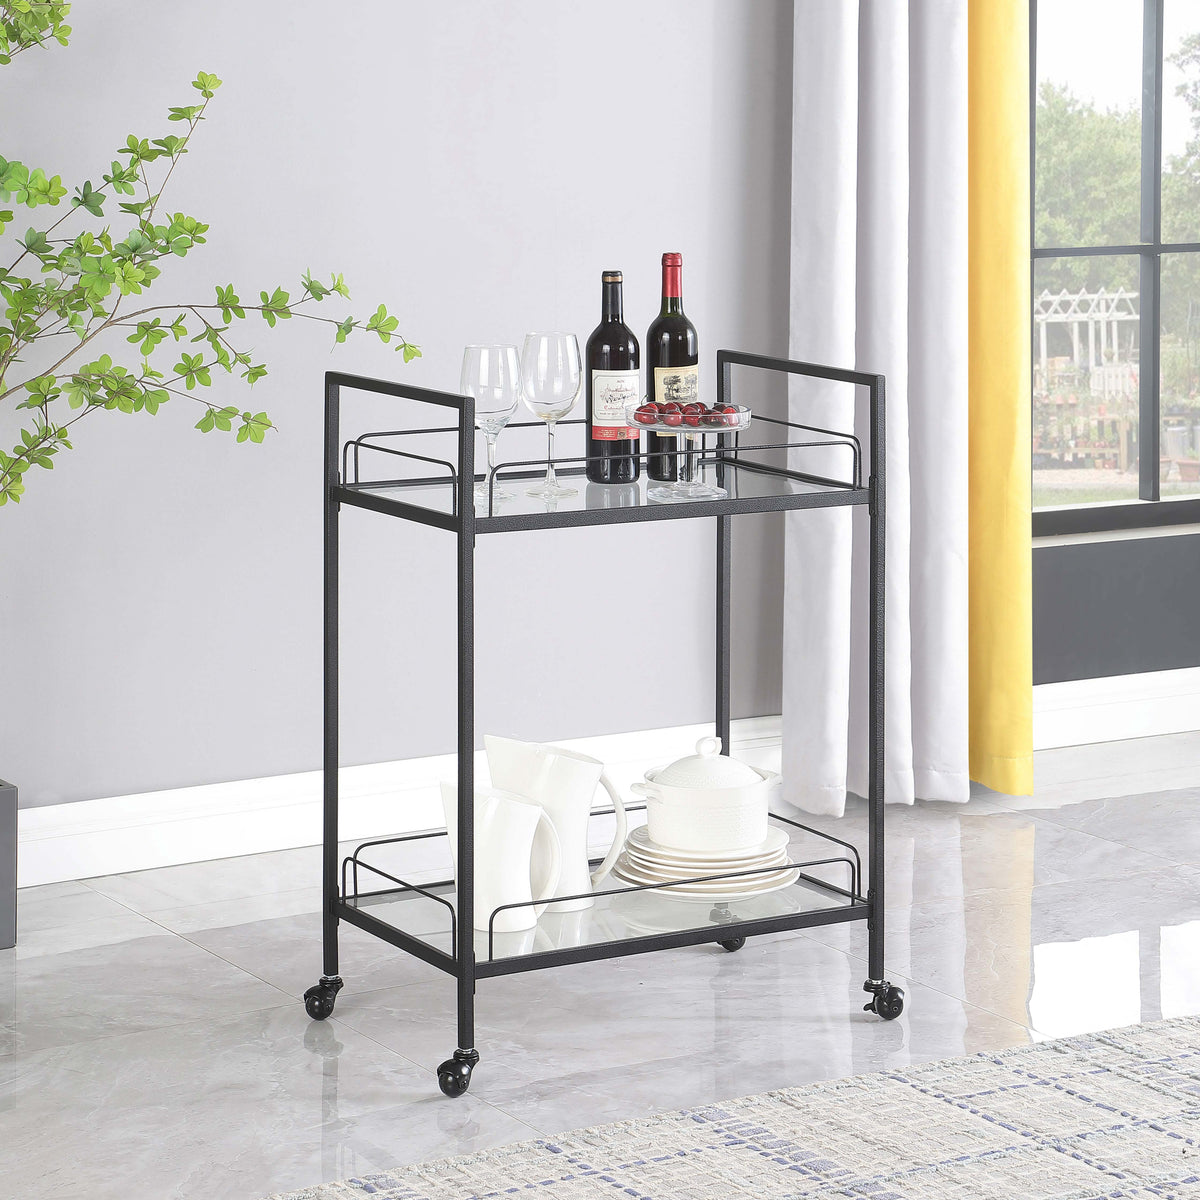 Curltis Serving Cart with Glass Shelves Clear and Black Curltis Serving Cart with Glass Shelves Clear and Black Half Price Furniture